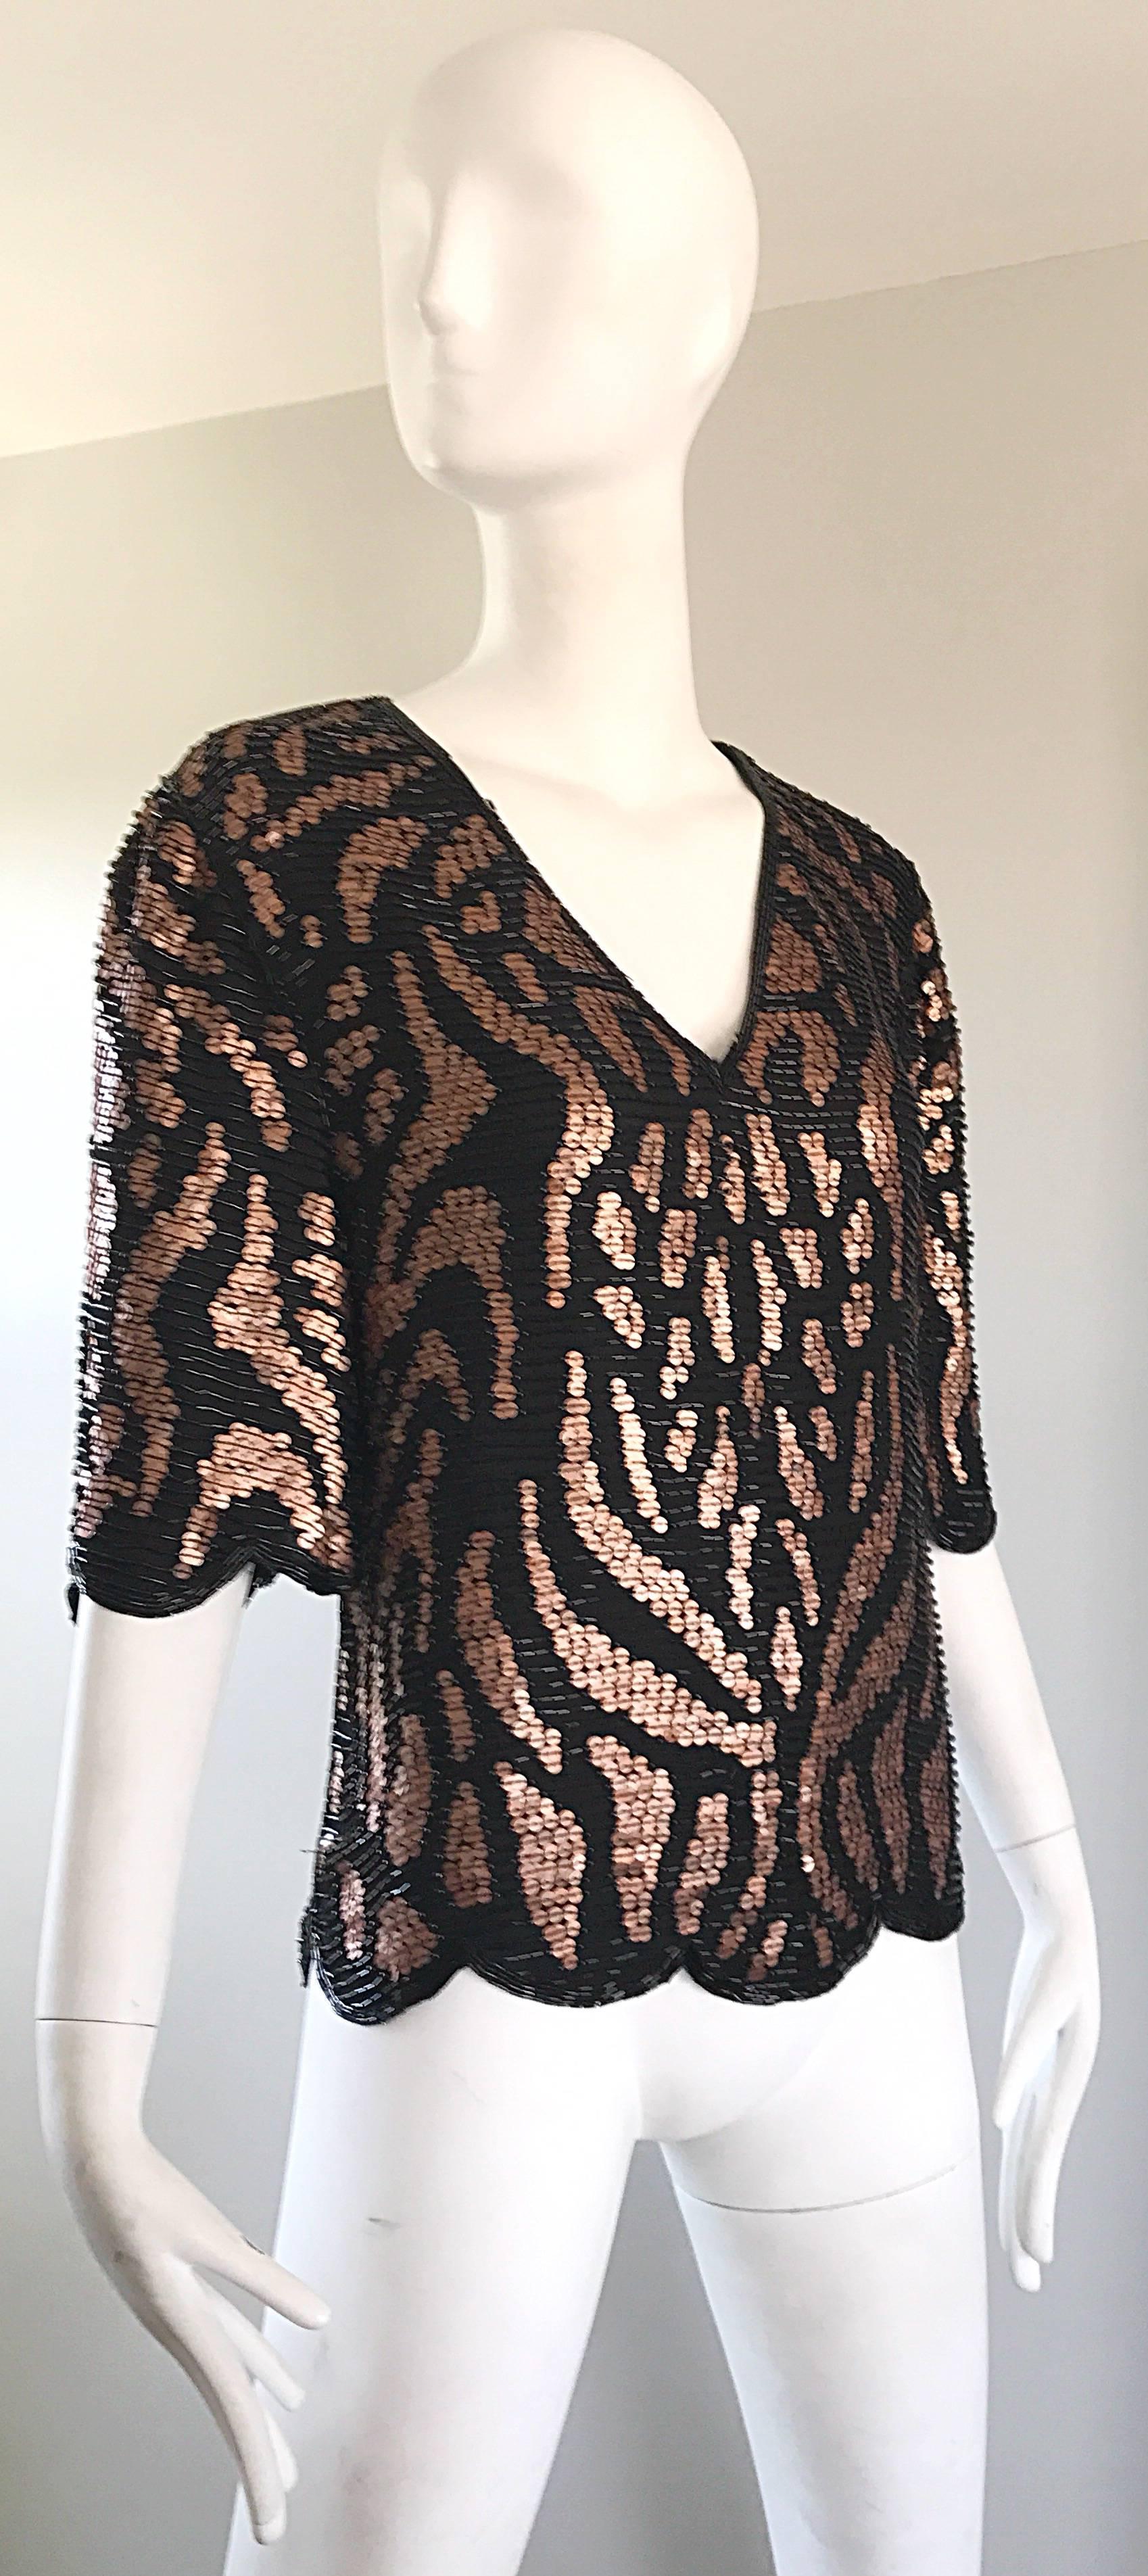 Beautiful vintage 90s JUDITH ANN fully beaded and sequined scalloped silk slouchy flapper top! Features thousands of hand-sewn sequins and beads in black and cooper/bronze. Chic leopard and zebra print through strategically sewn beads and sequins